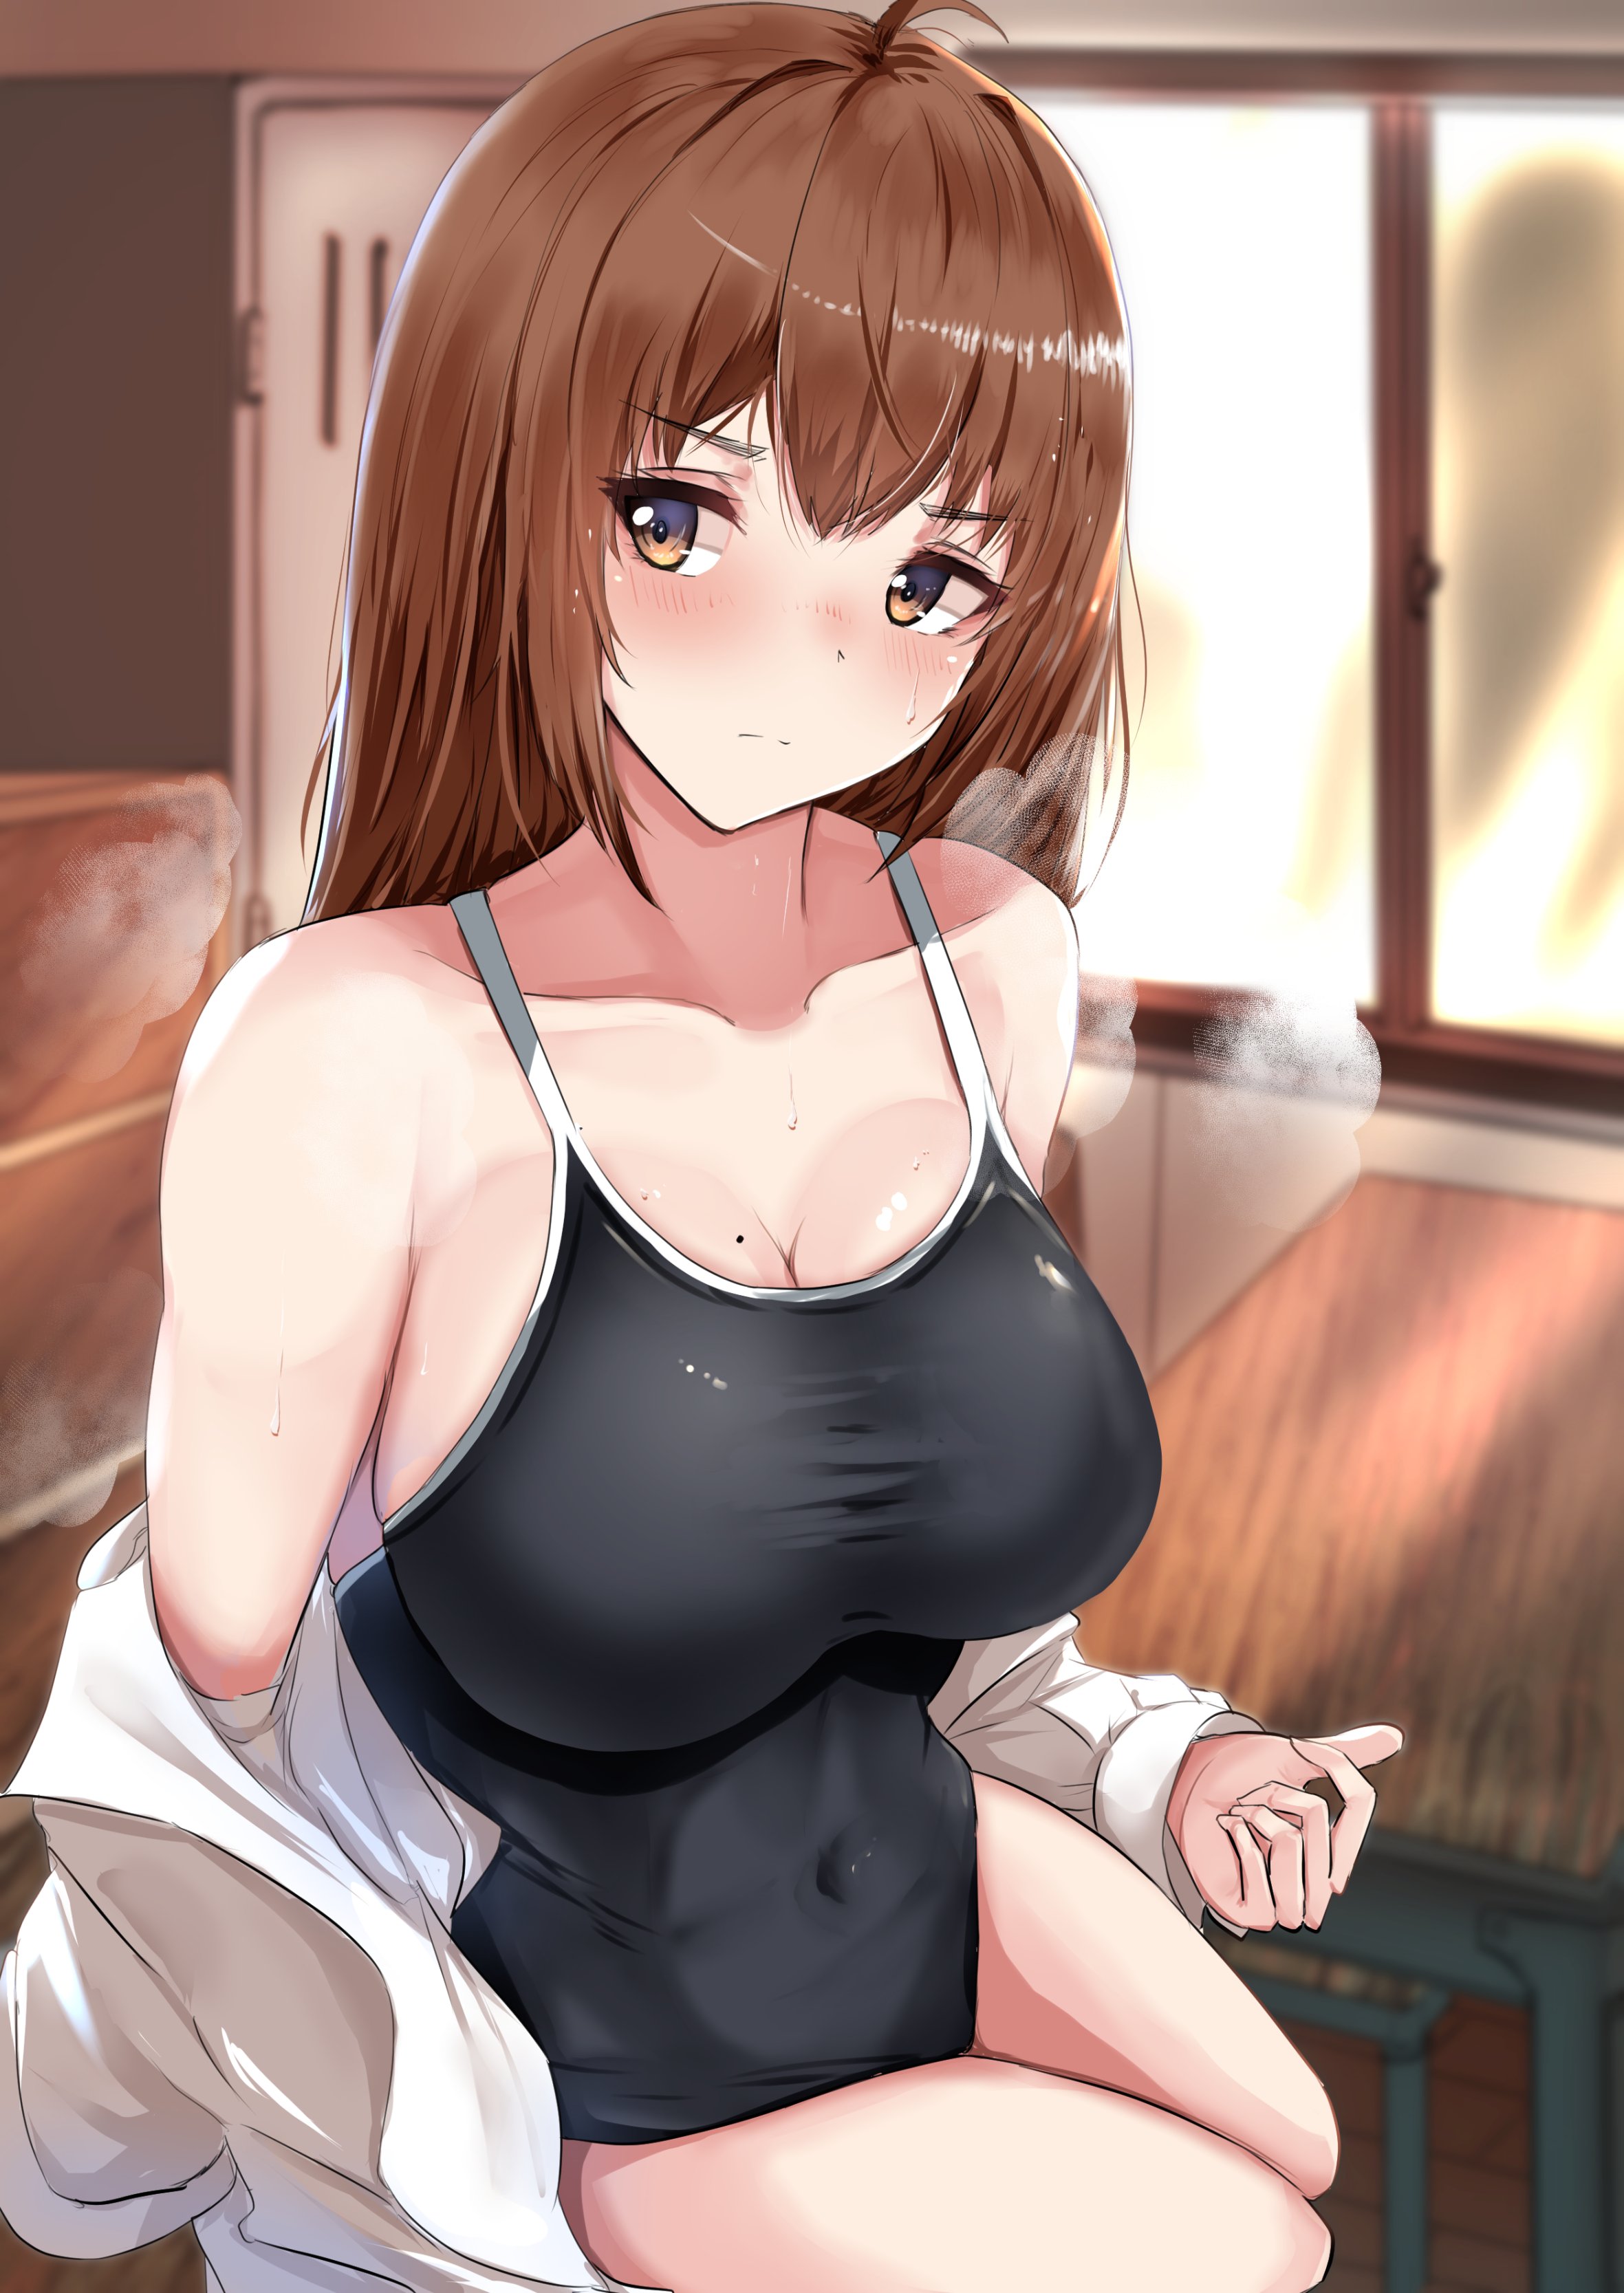 Anime 2361x3334 anime girls original characters one-piece swimsuit big boobs brunette brown eyes blushing school swimsuits cleavage open shirt classroom Take (artist)